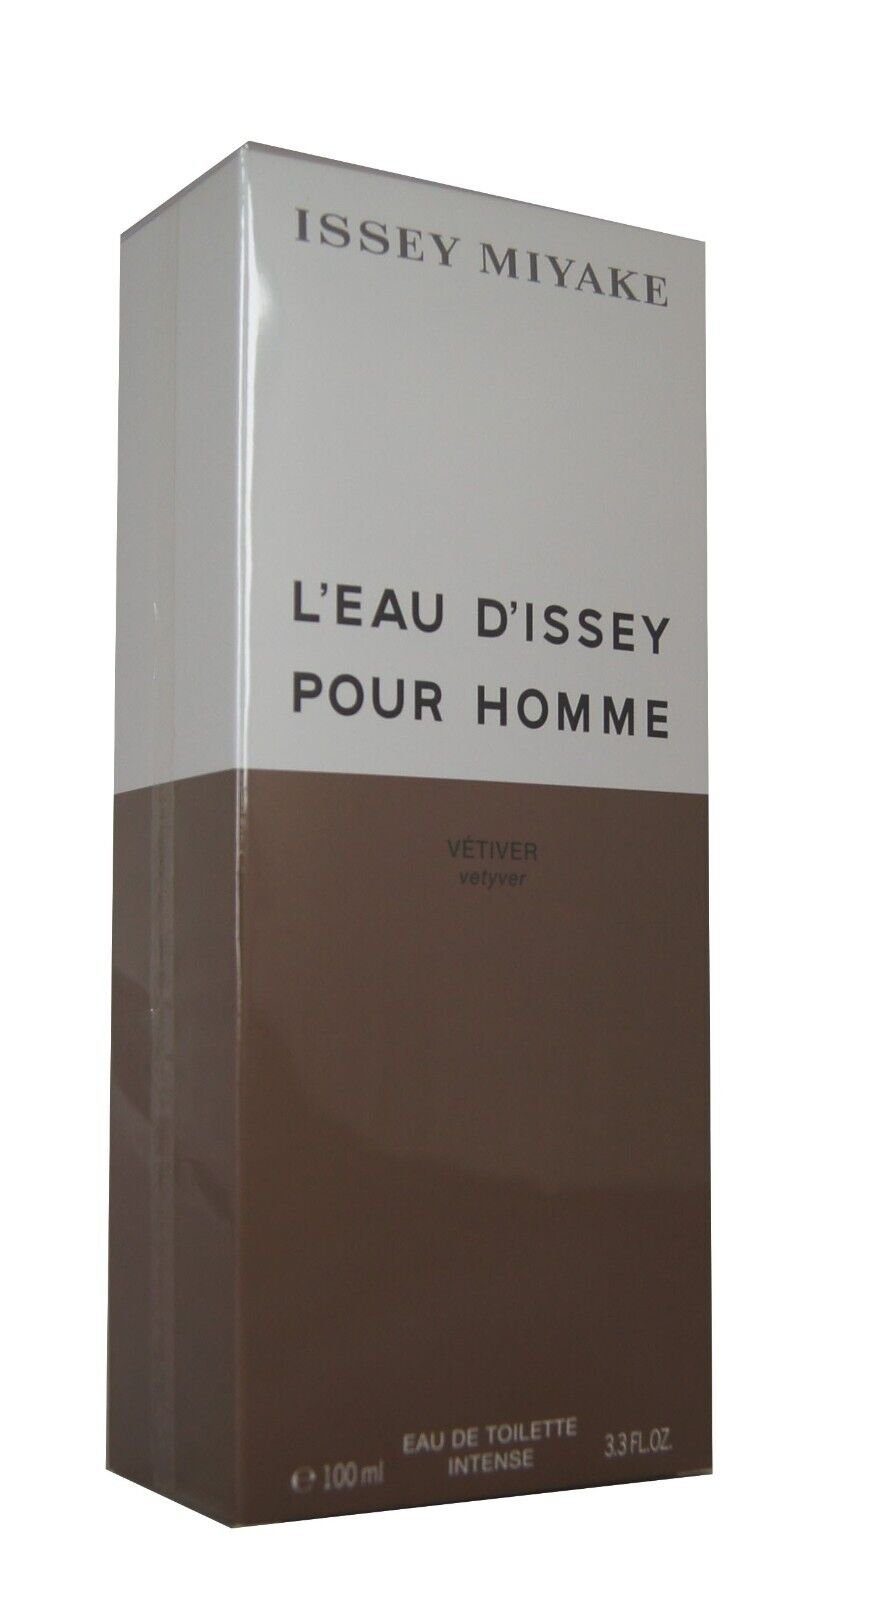 Issey Toilette Miyake L'Eau Homme Vetiver Eau Pour de EDT Miyake Issey Intense 100ml D`Issey